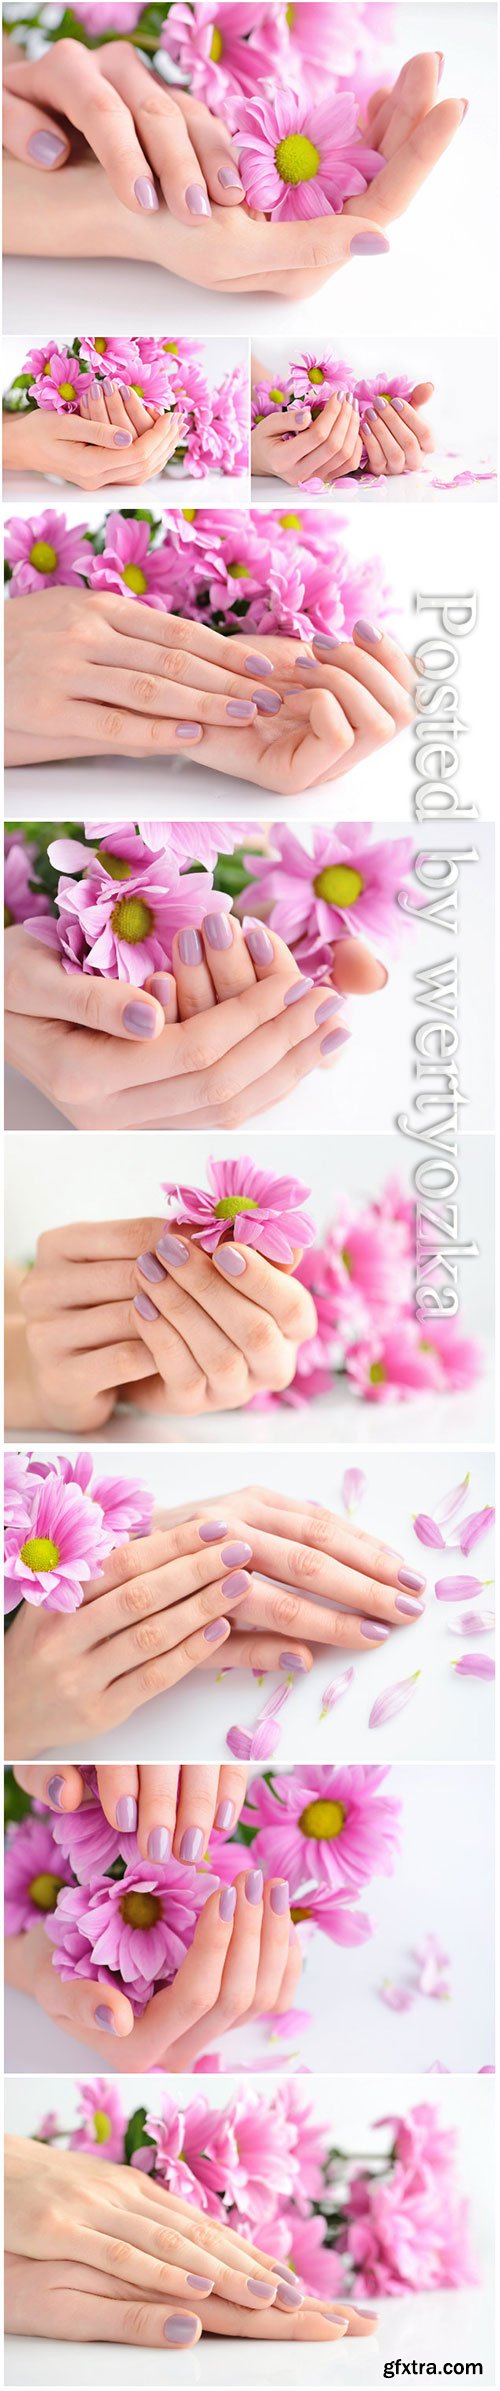 Beautiful manicure, hands with flowers